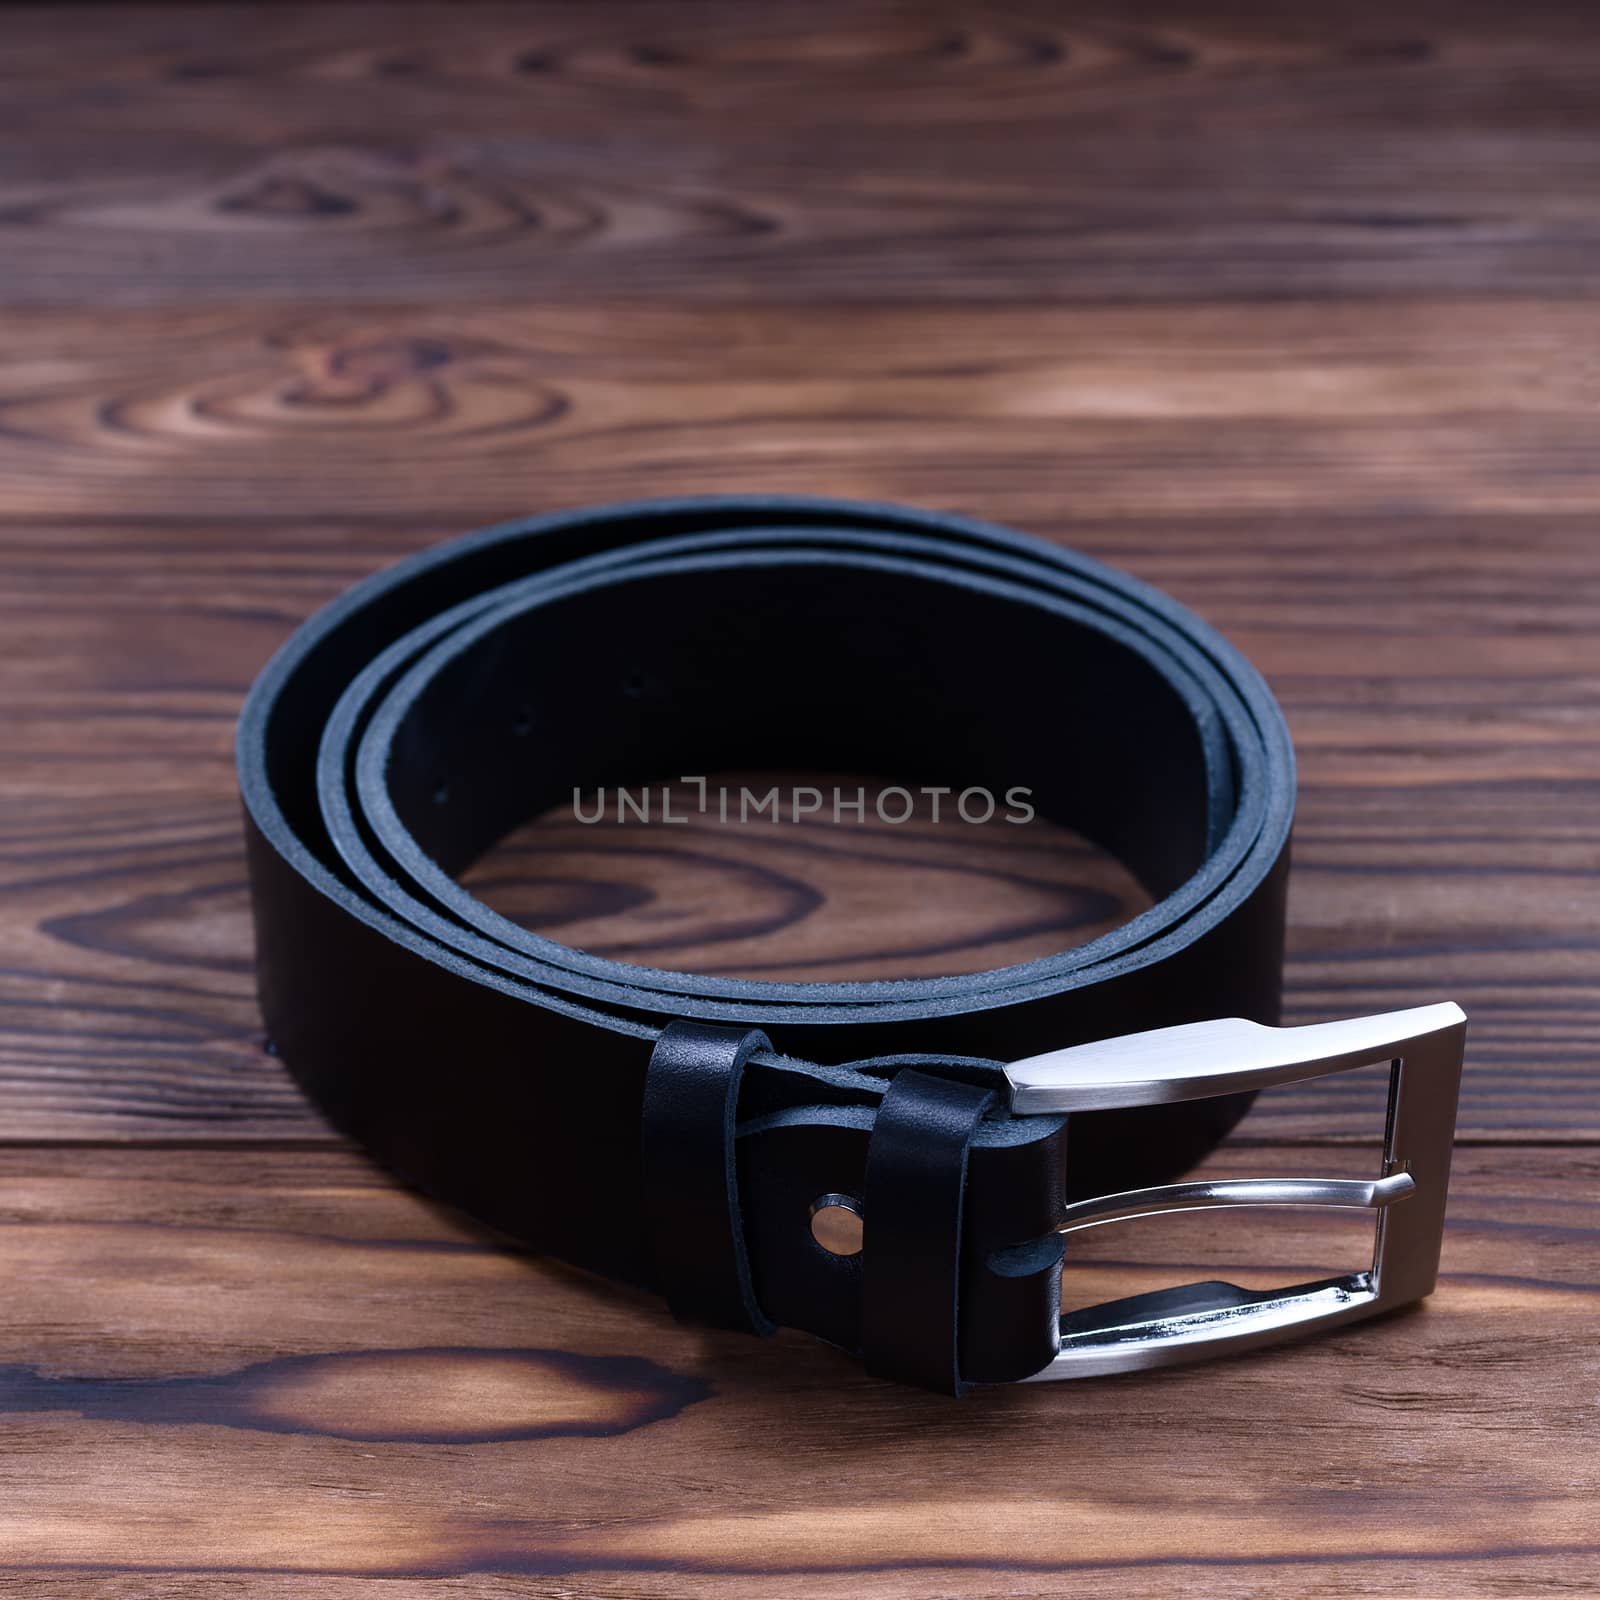 Black color handmade belt lies on textured wooden background. The belt is twisted into a ring. Closeup side view. Stock photo of businessman accessories.